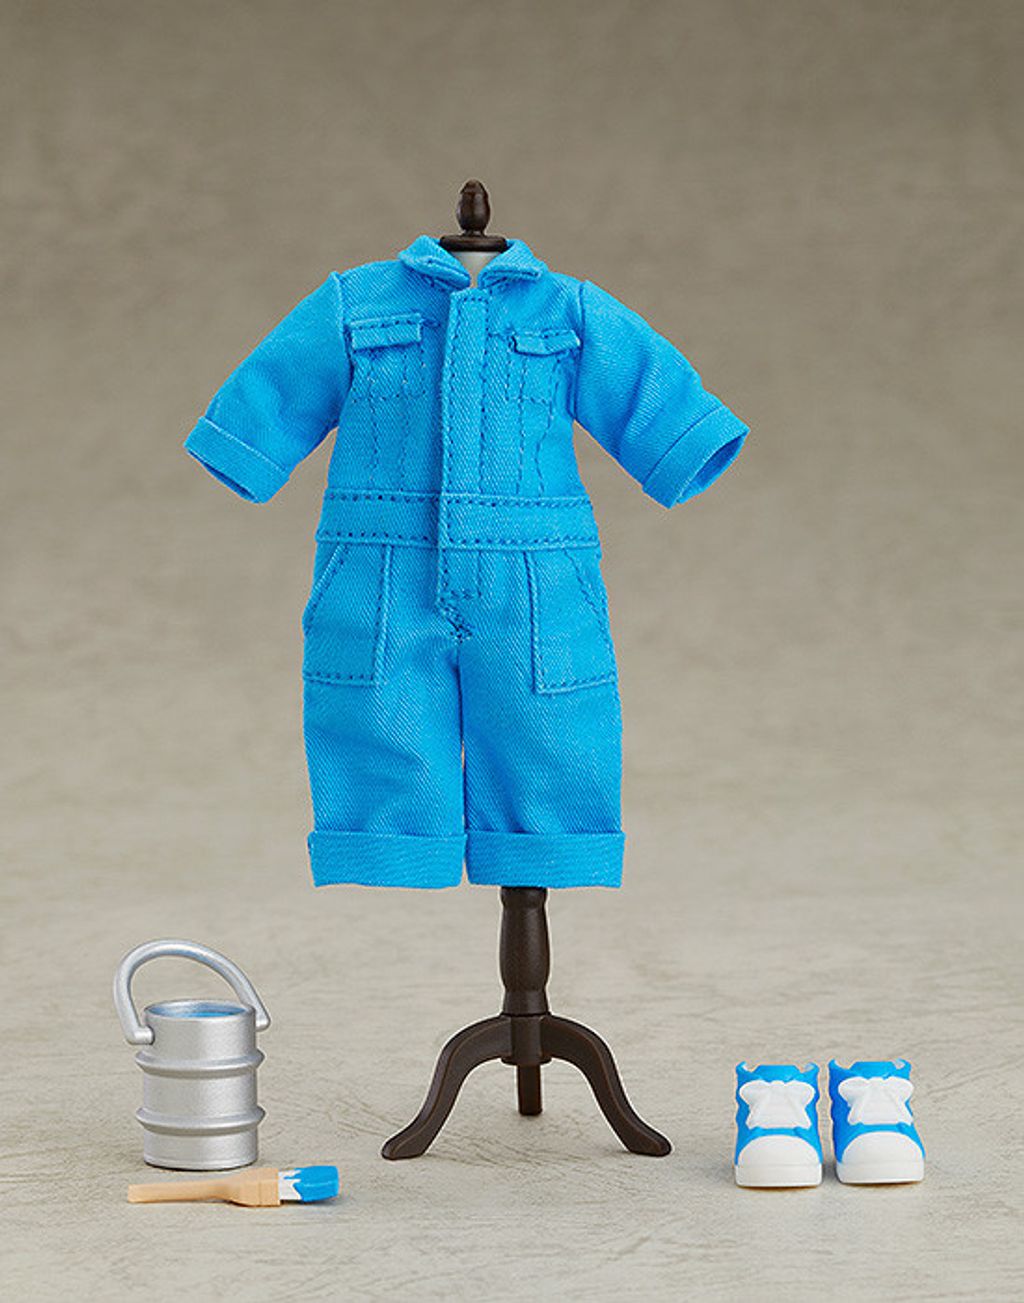 Nendoroid Doll- Outfit Set (Colorful Coveralls - Blue).jpg